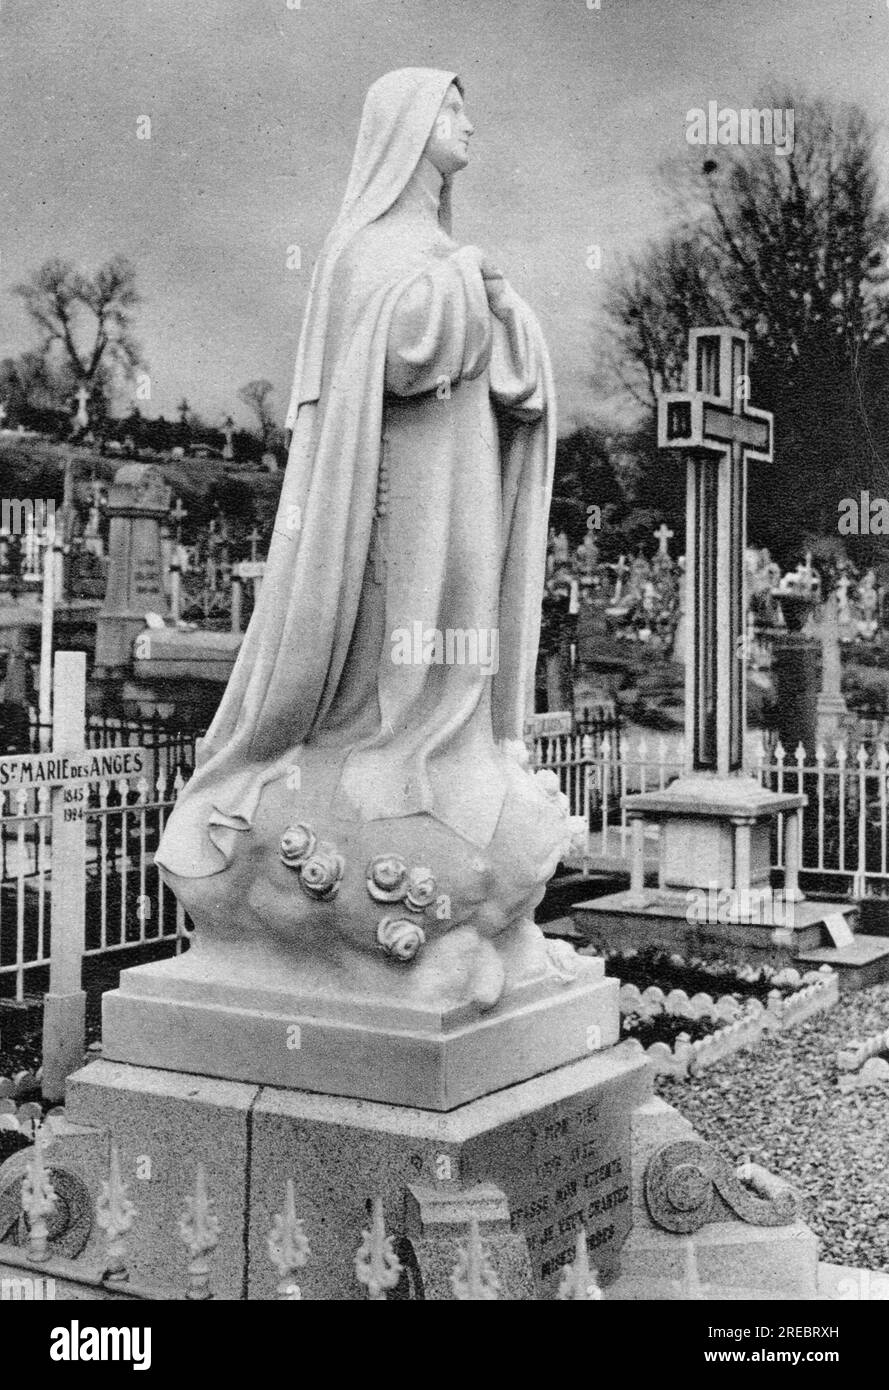 Theresia of Lisieux, 2.1.1873 - 30.9.1897, French nun, Saint, statue on their grave, ADDITIONAL-RIGHTS-CLEARANCE-INFO-NOT-AVAILABLE Stock Photo